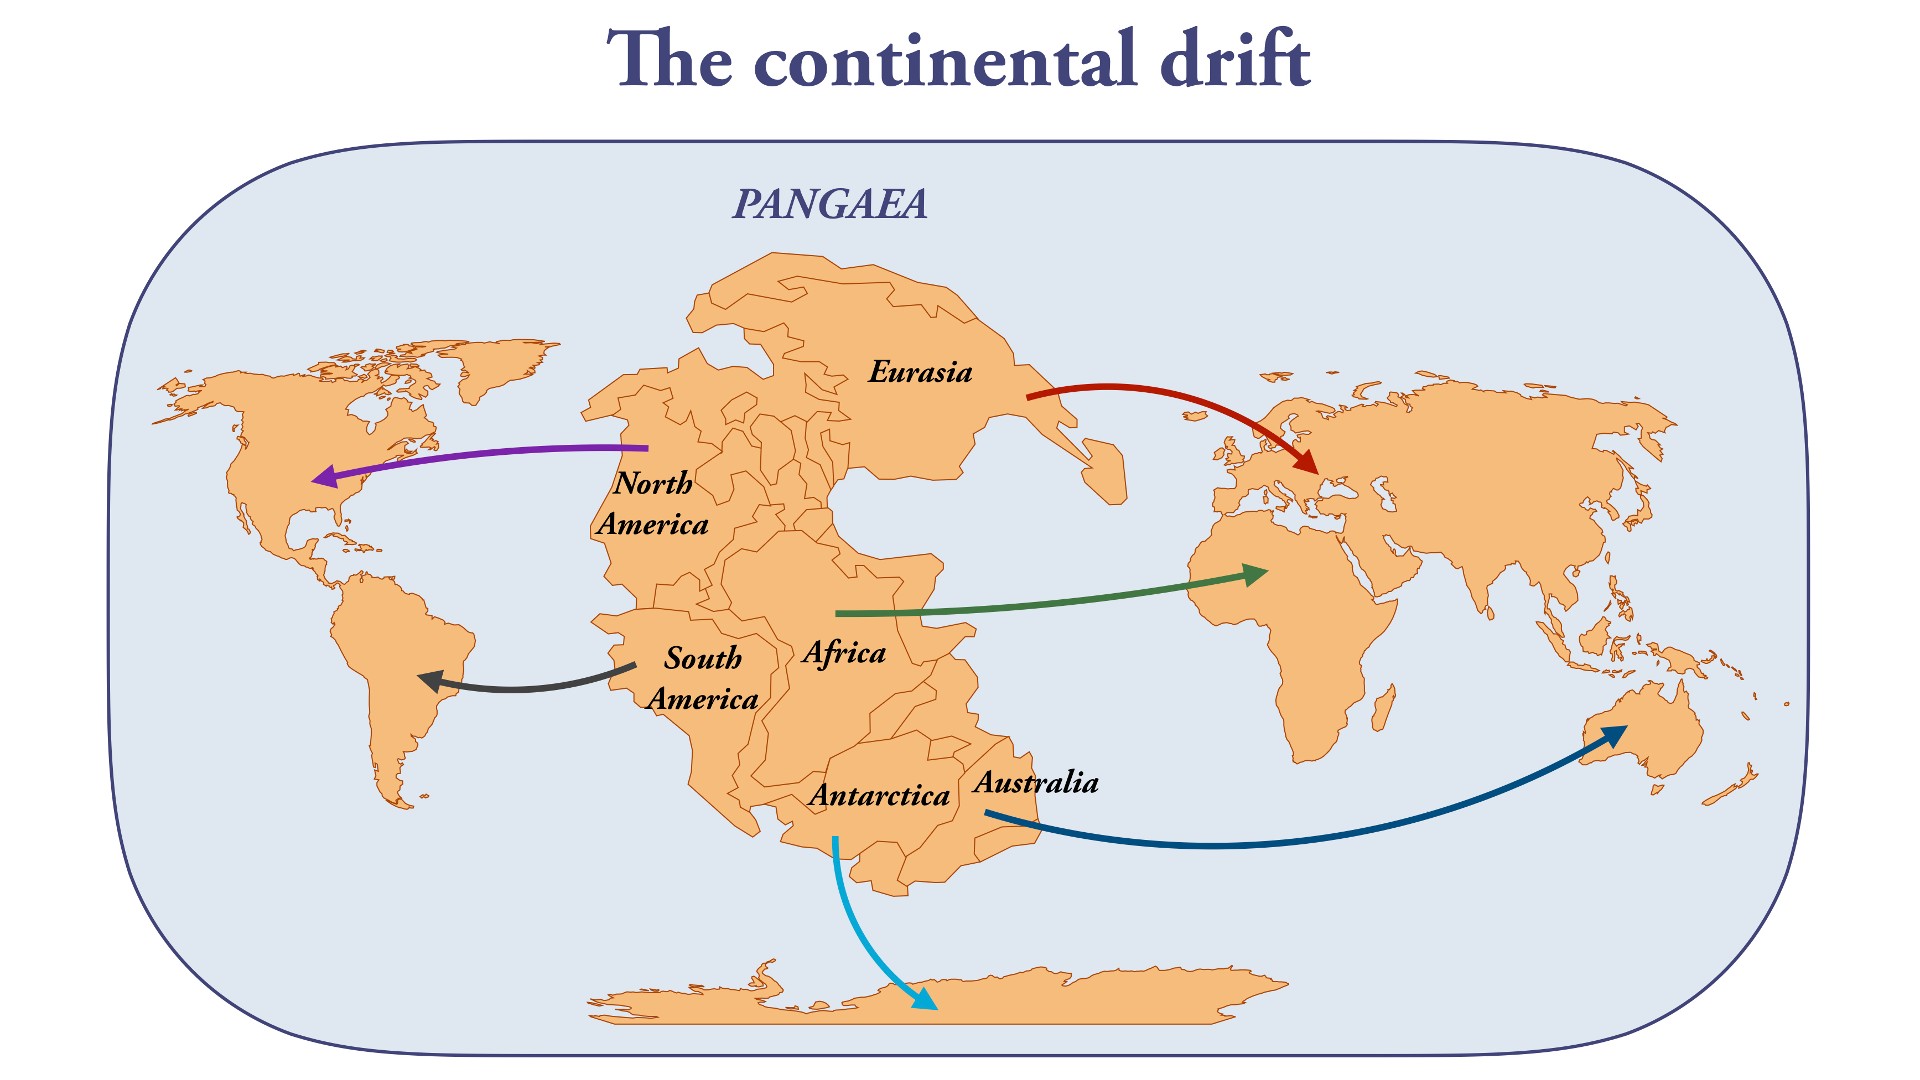 The continental drift and the formation of the continents by the separation of Pangaea_Dimitrios Karamitros via Getty Images